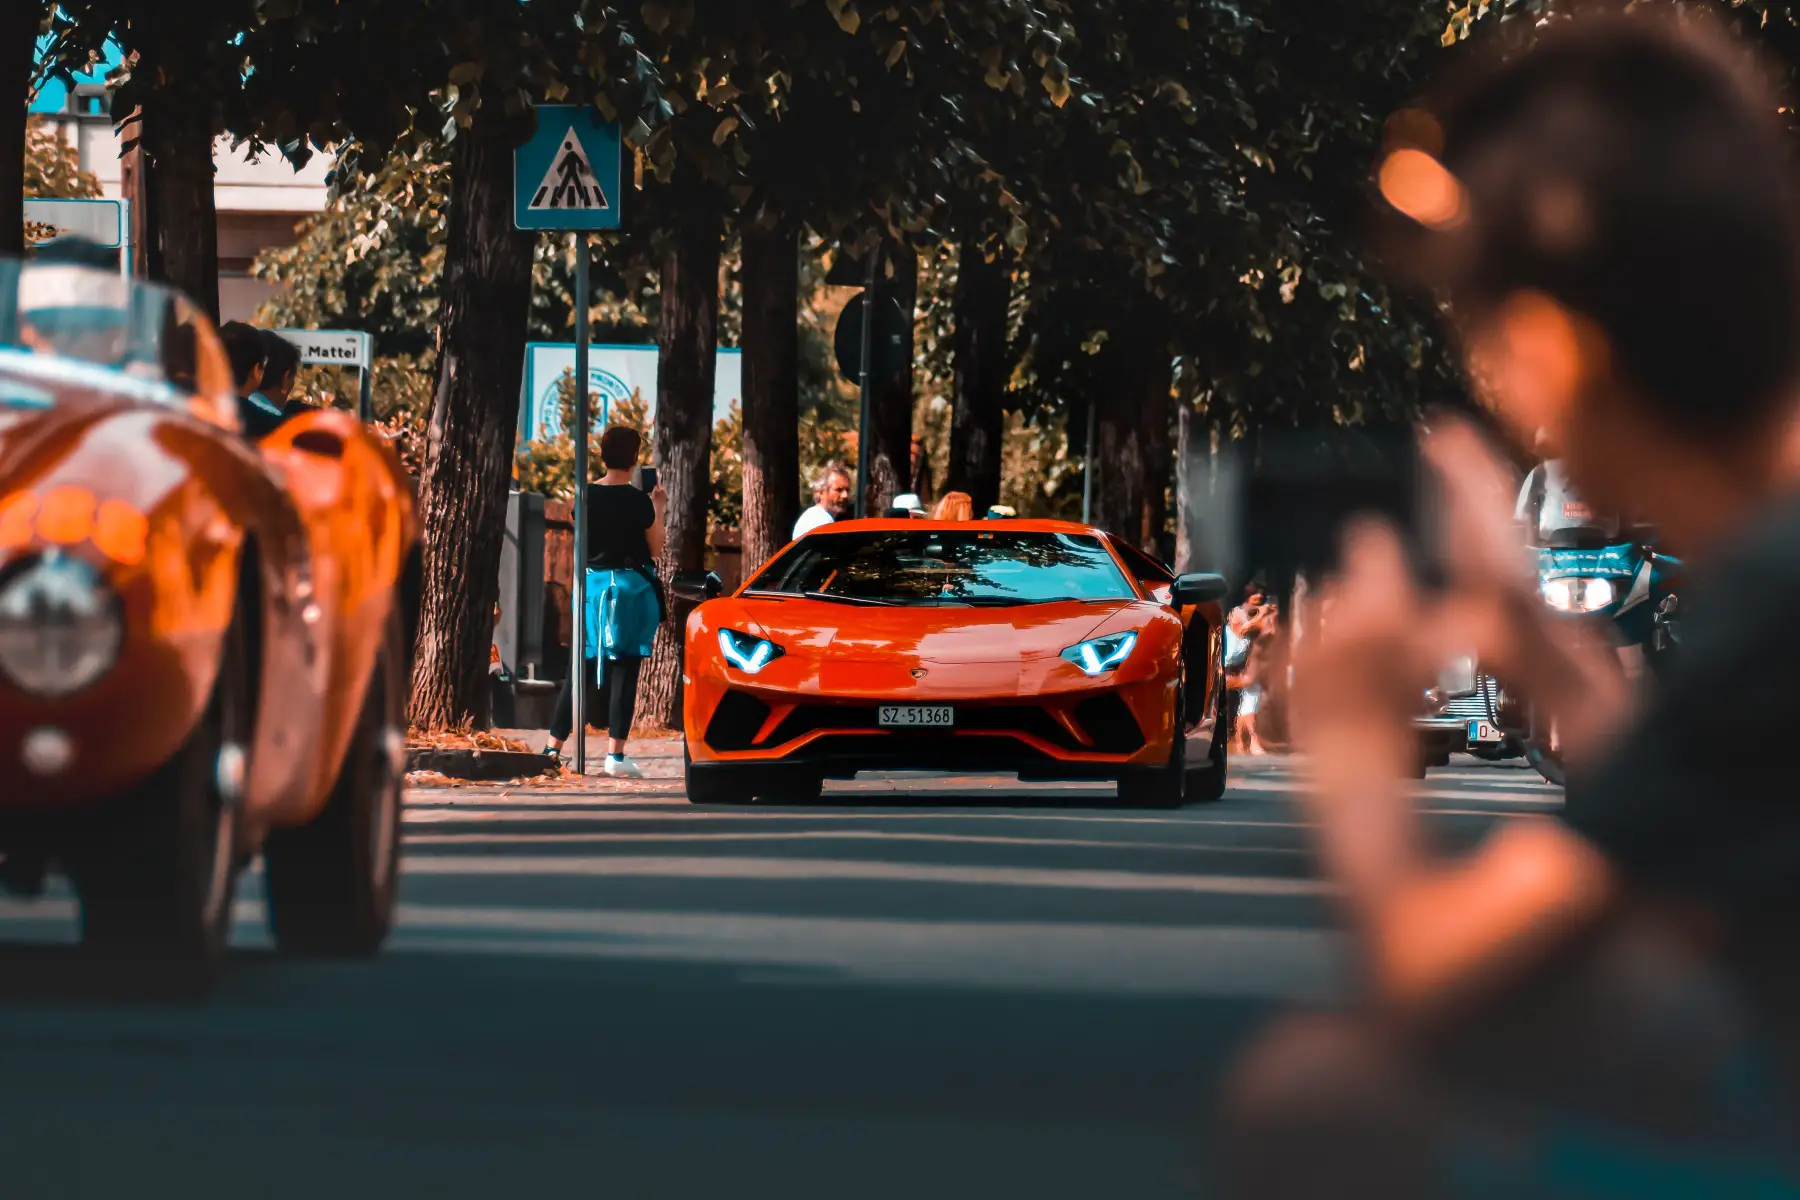 A red Lamborghini driving along a quiet street in Milan, Italy